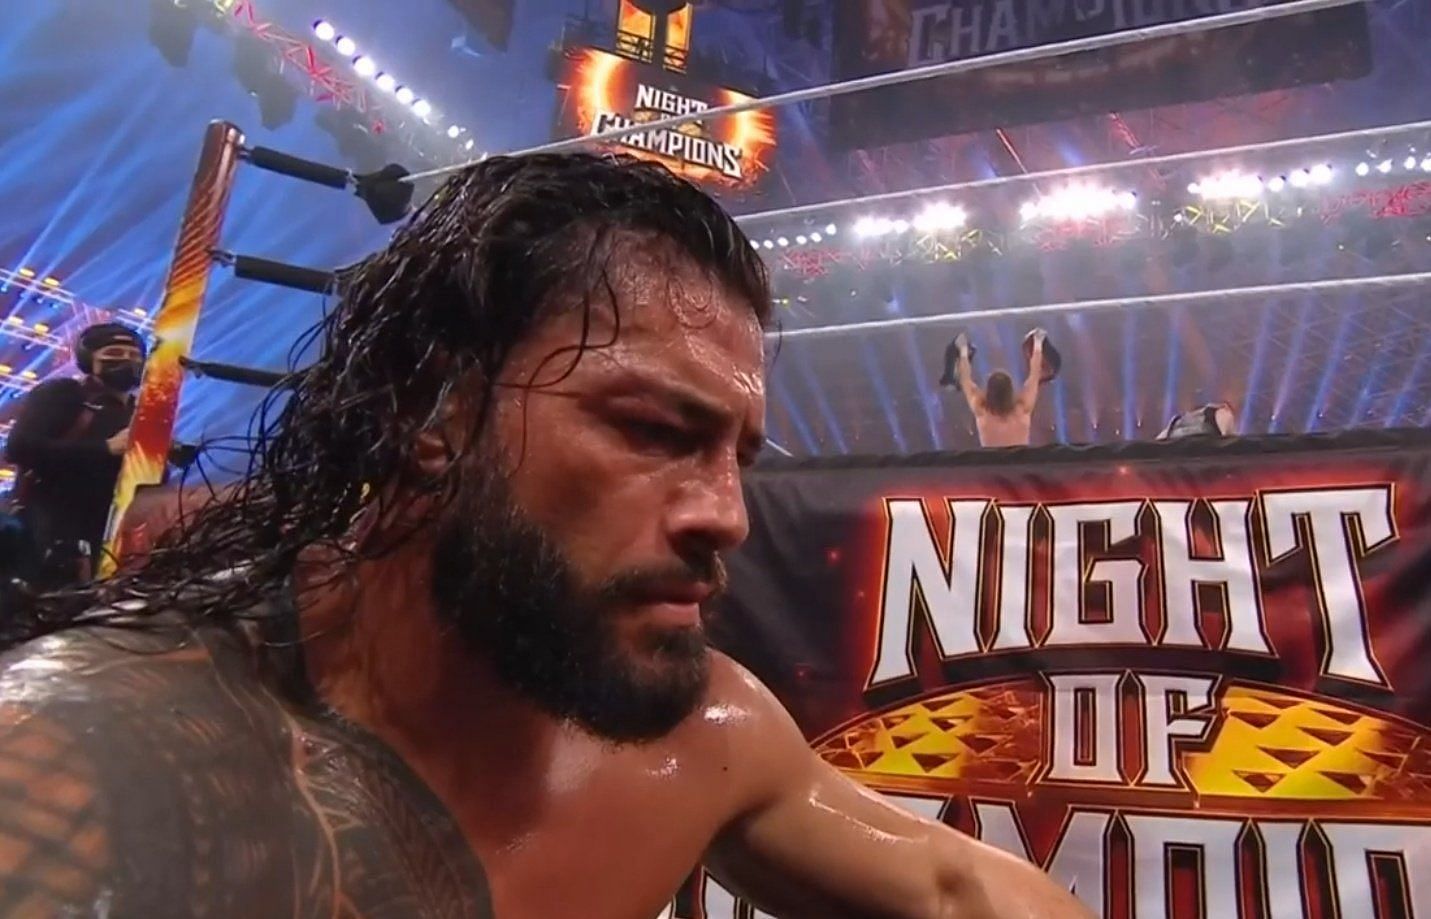 Roman Reigns was devastated after the loss at Night of Champions